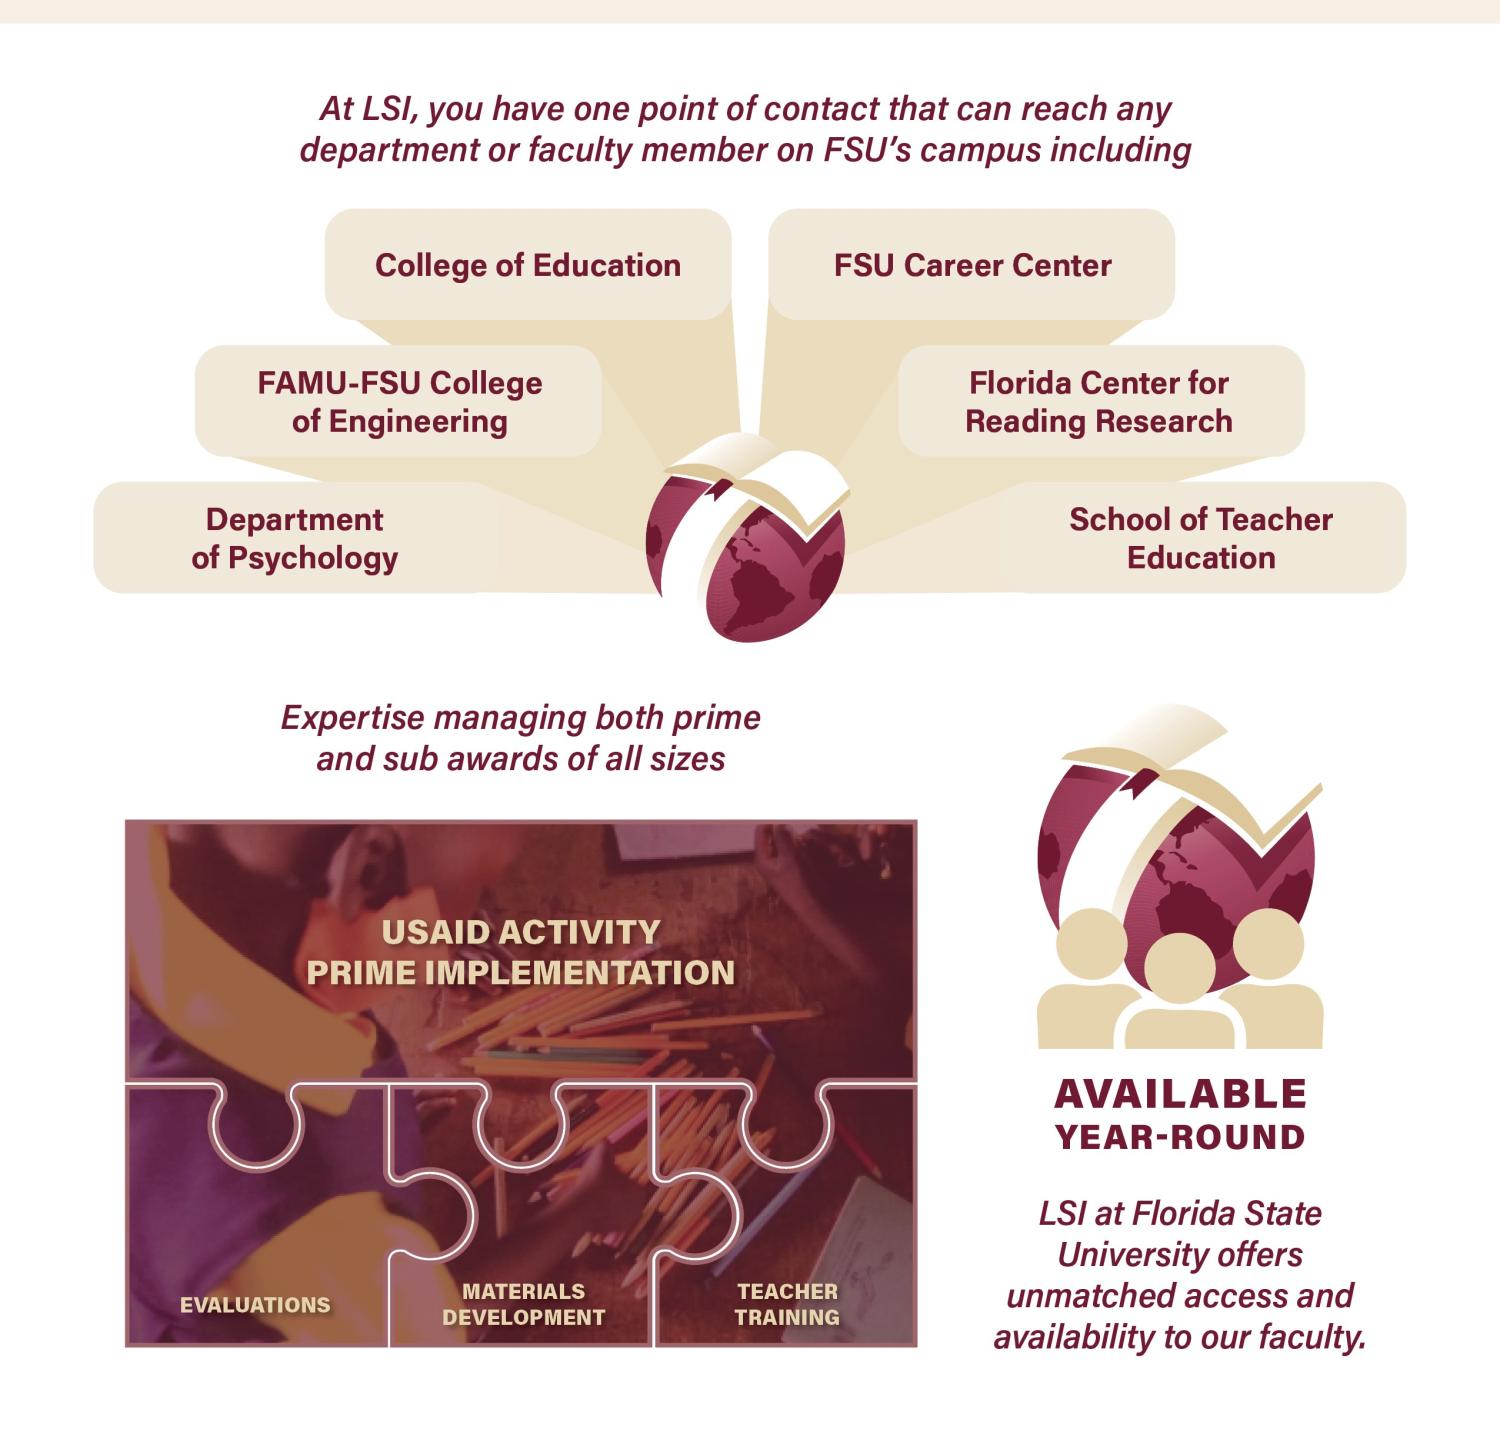 "Large graphic explaining the benefits of working with LSI. The three sections are access to FSU departments, expertise in managing prime and sub awards and availability yea round to FSU faculty and staff. "